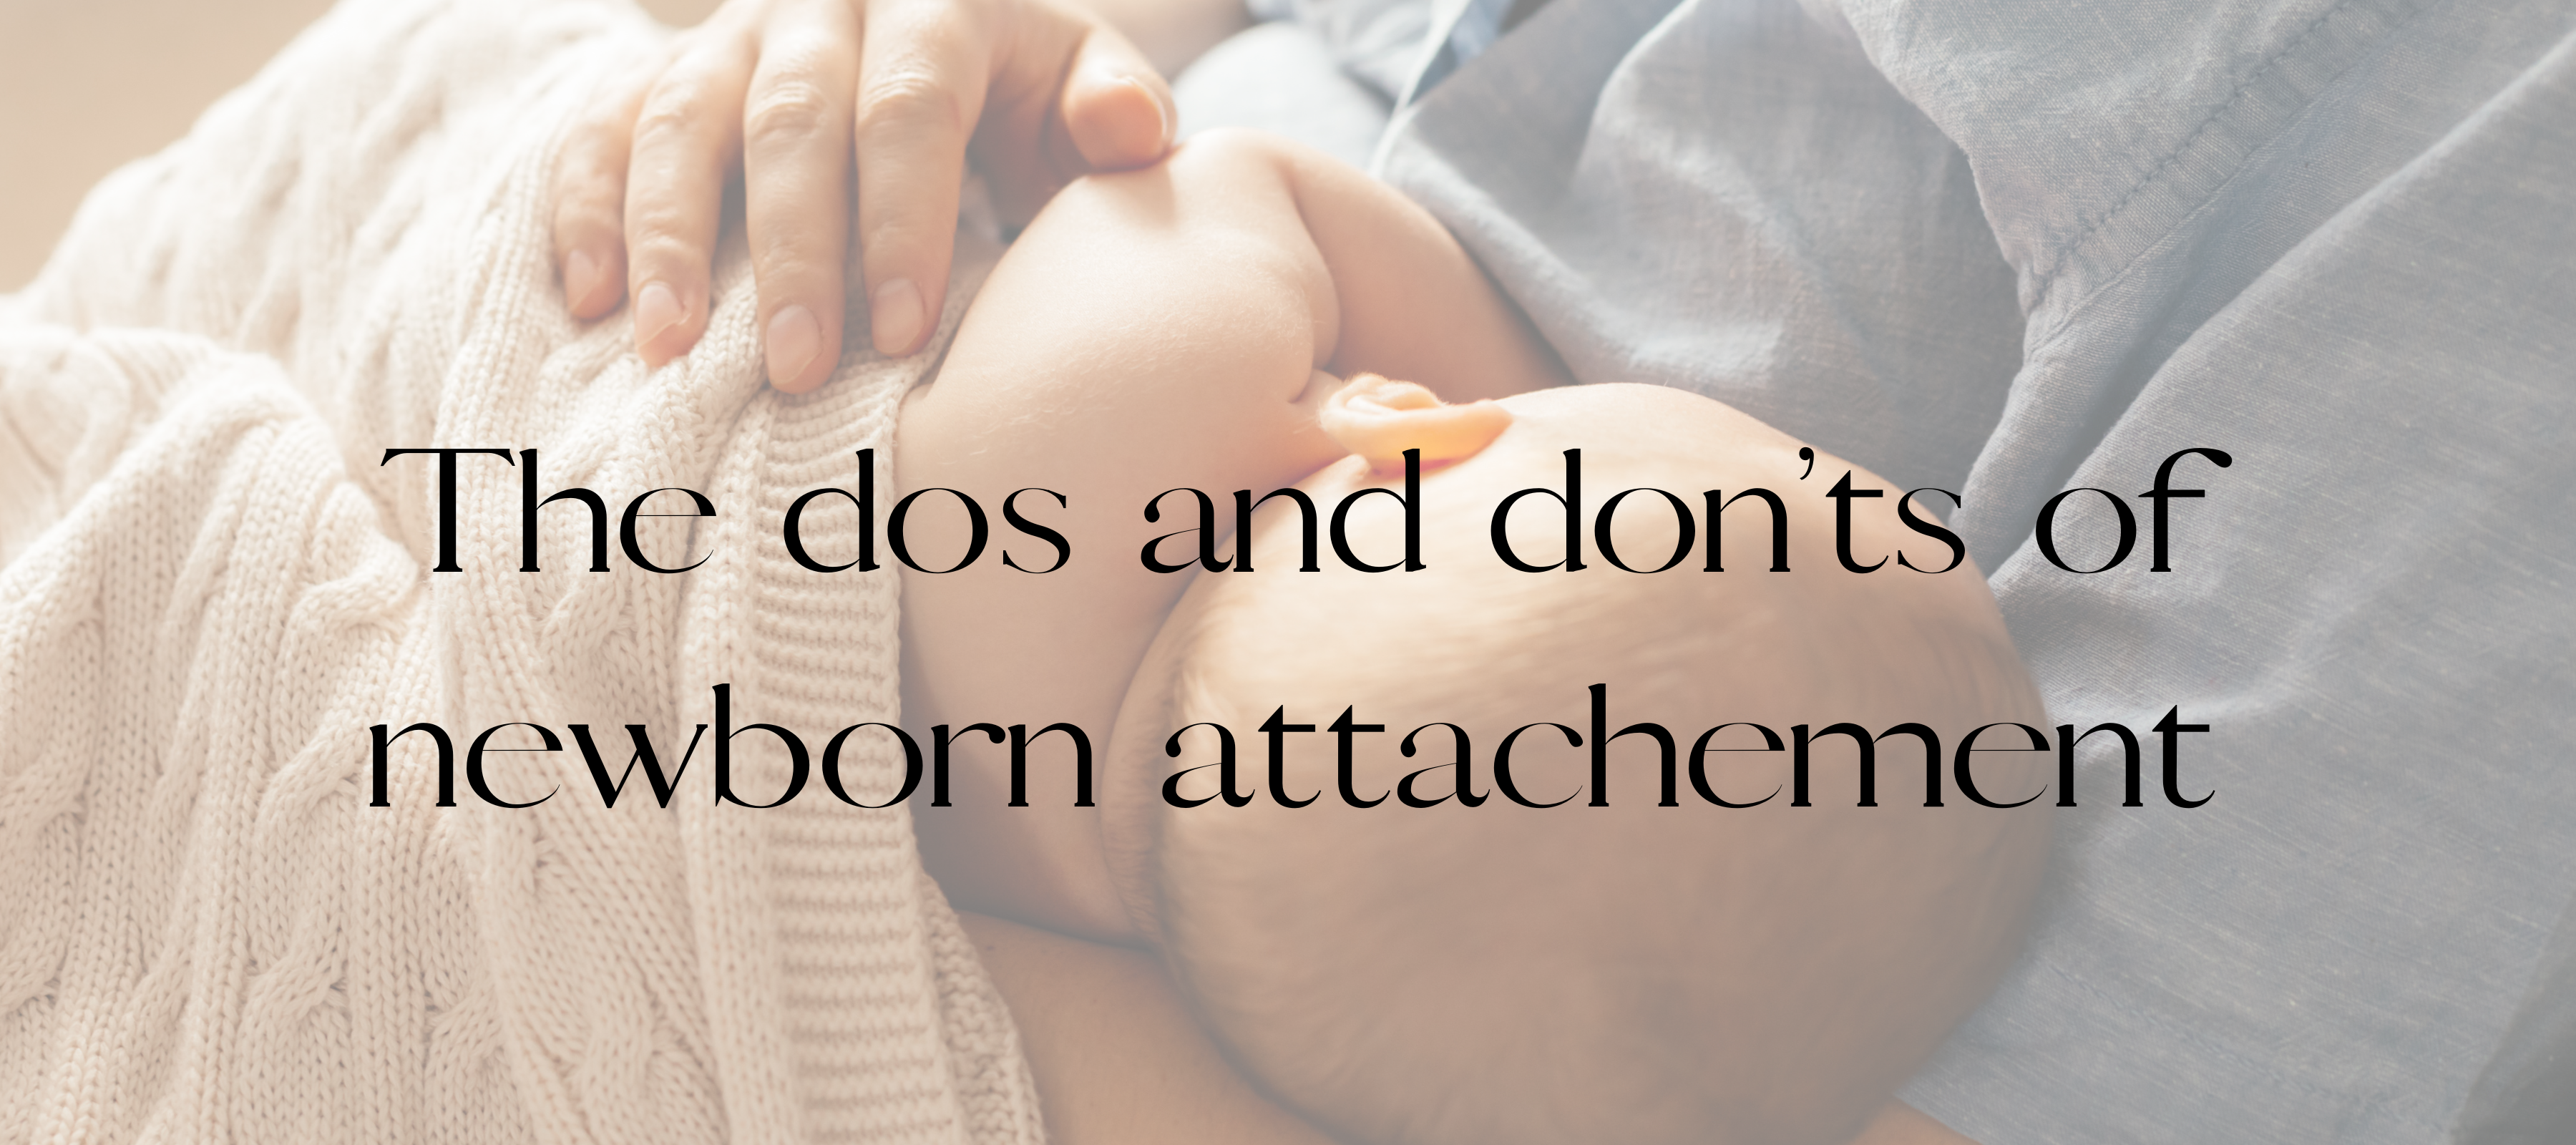 The dos and don'ts of newborn attachment